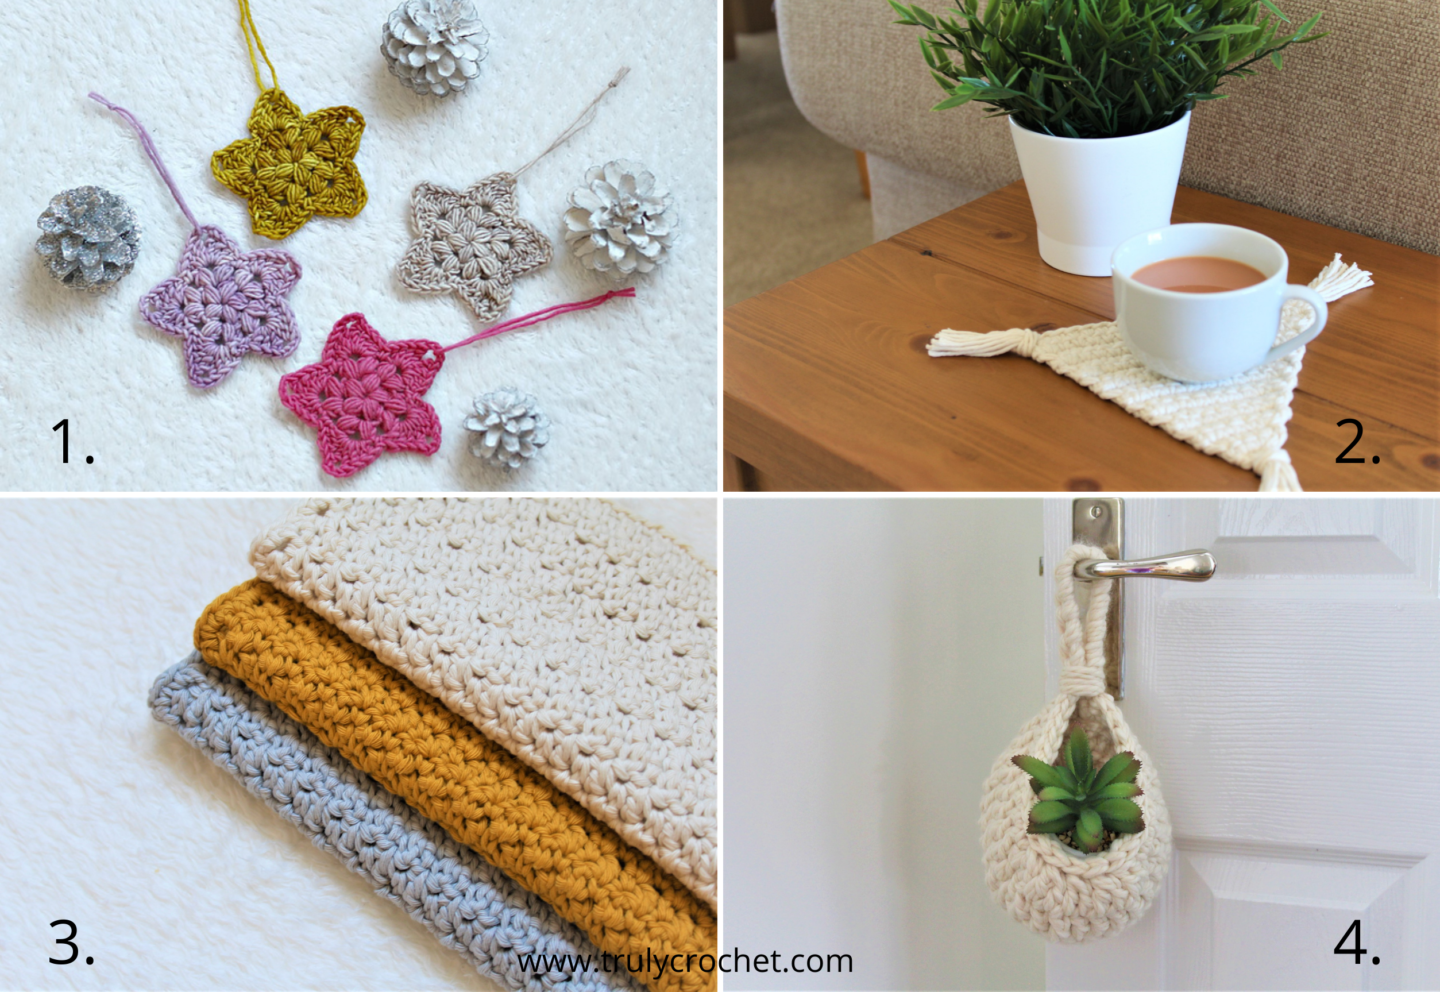 Related Posts - Free Crochet Patterns